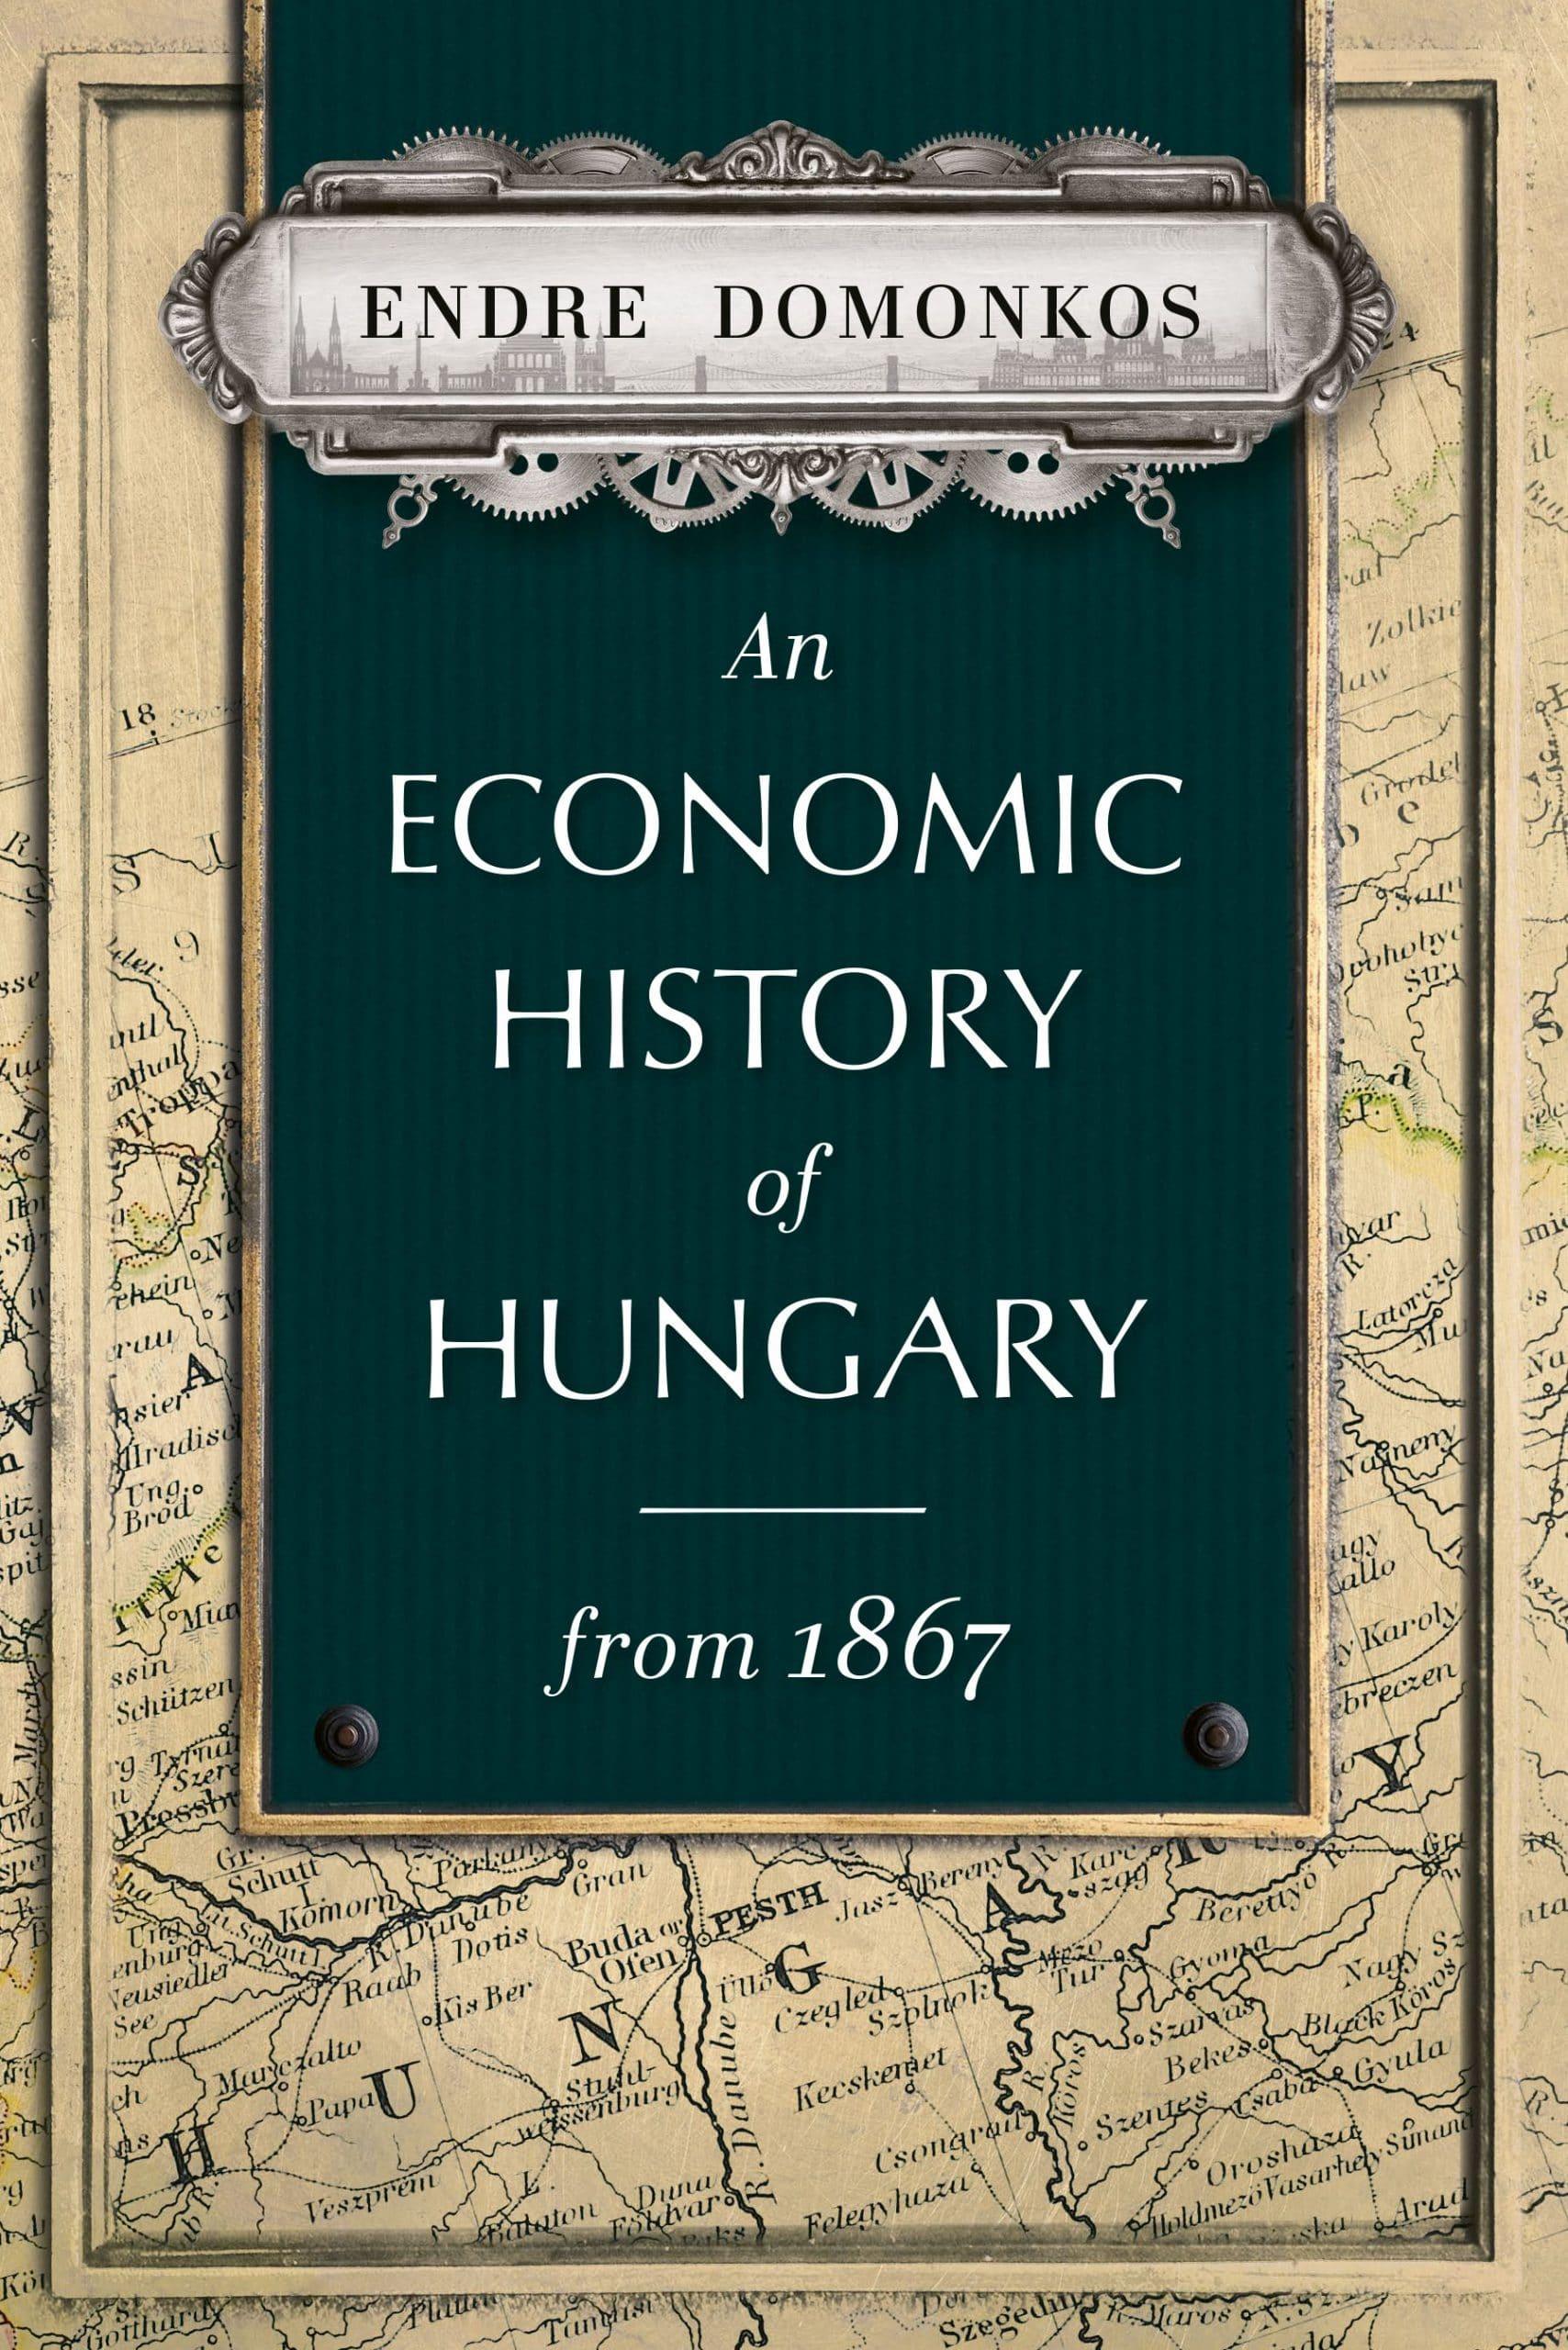 An economic history of Hungary from 1867